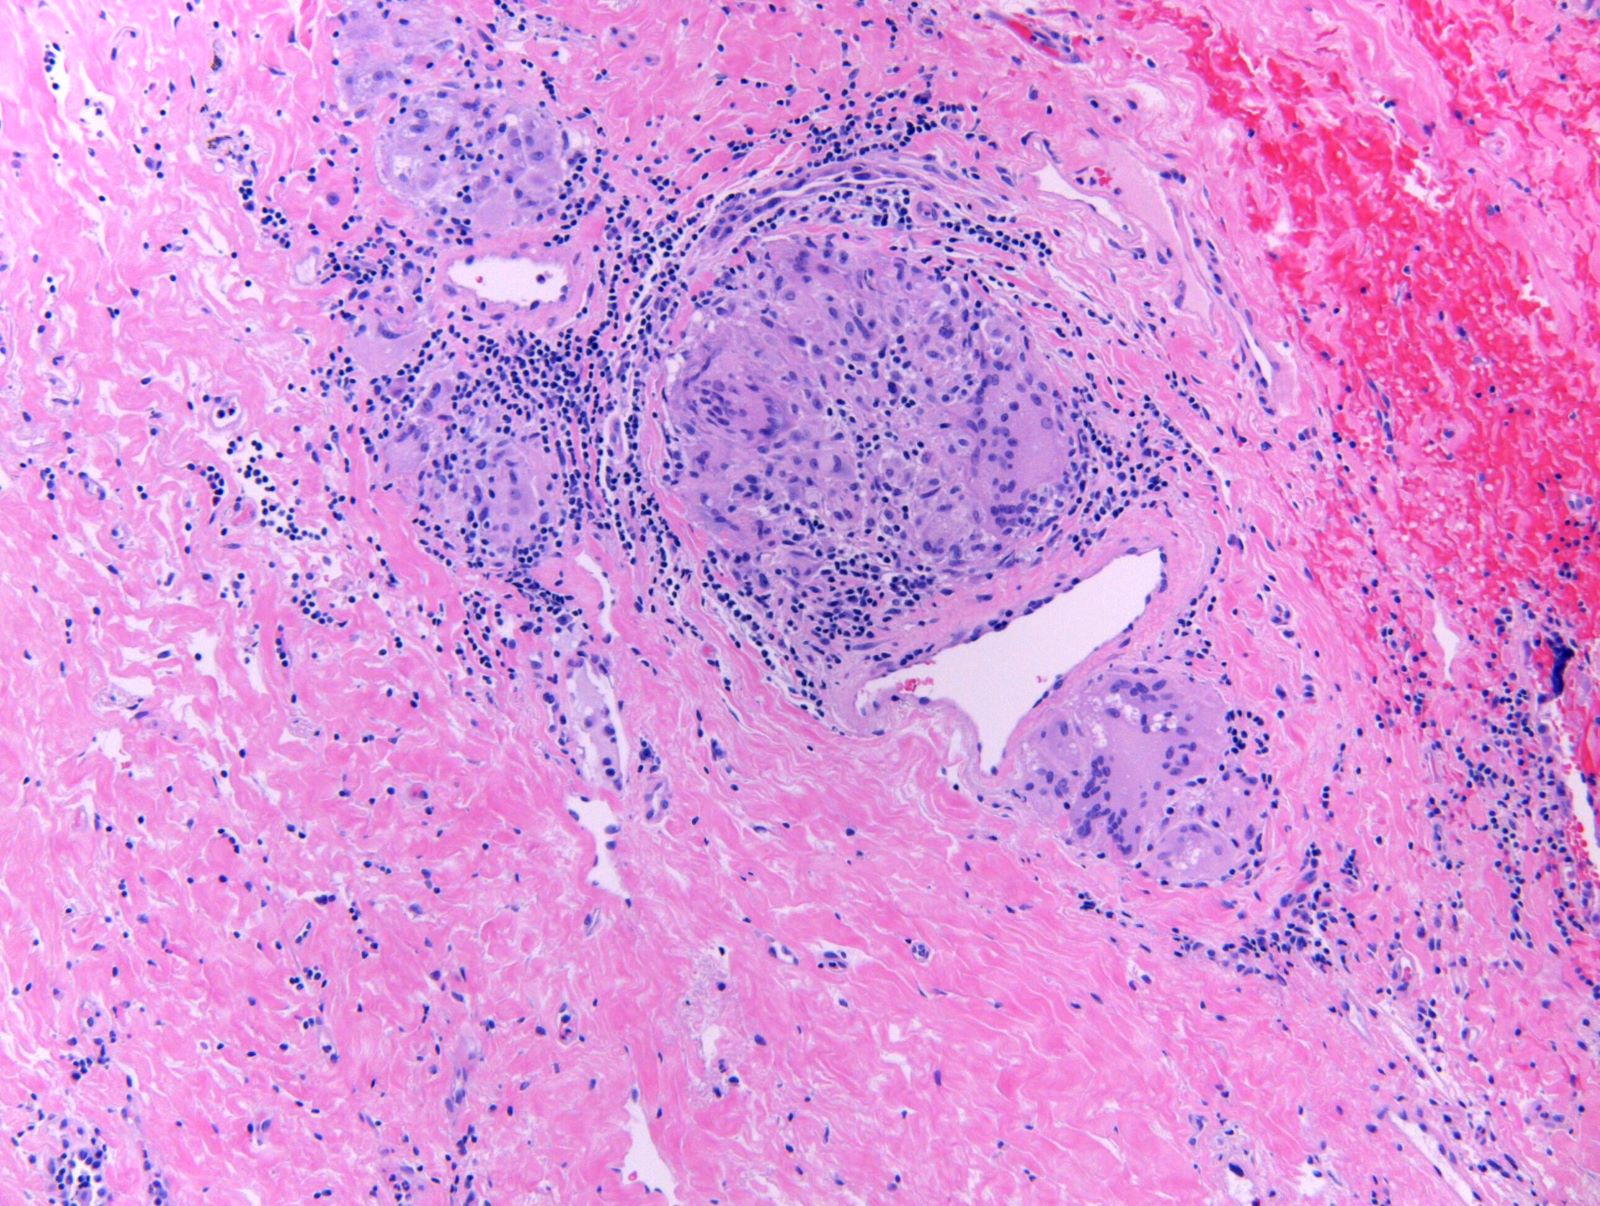 Multinulceated giant cells and fibrosis